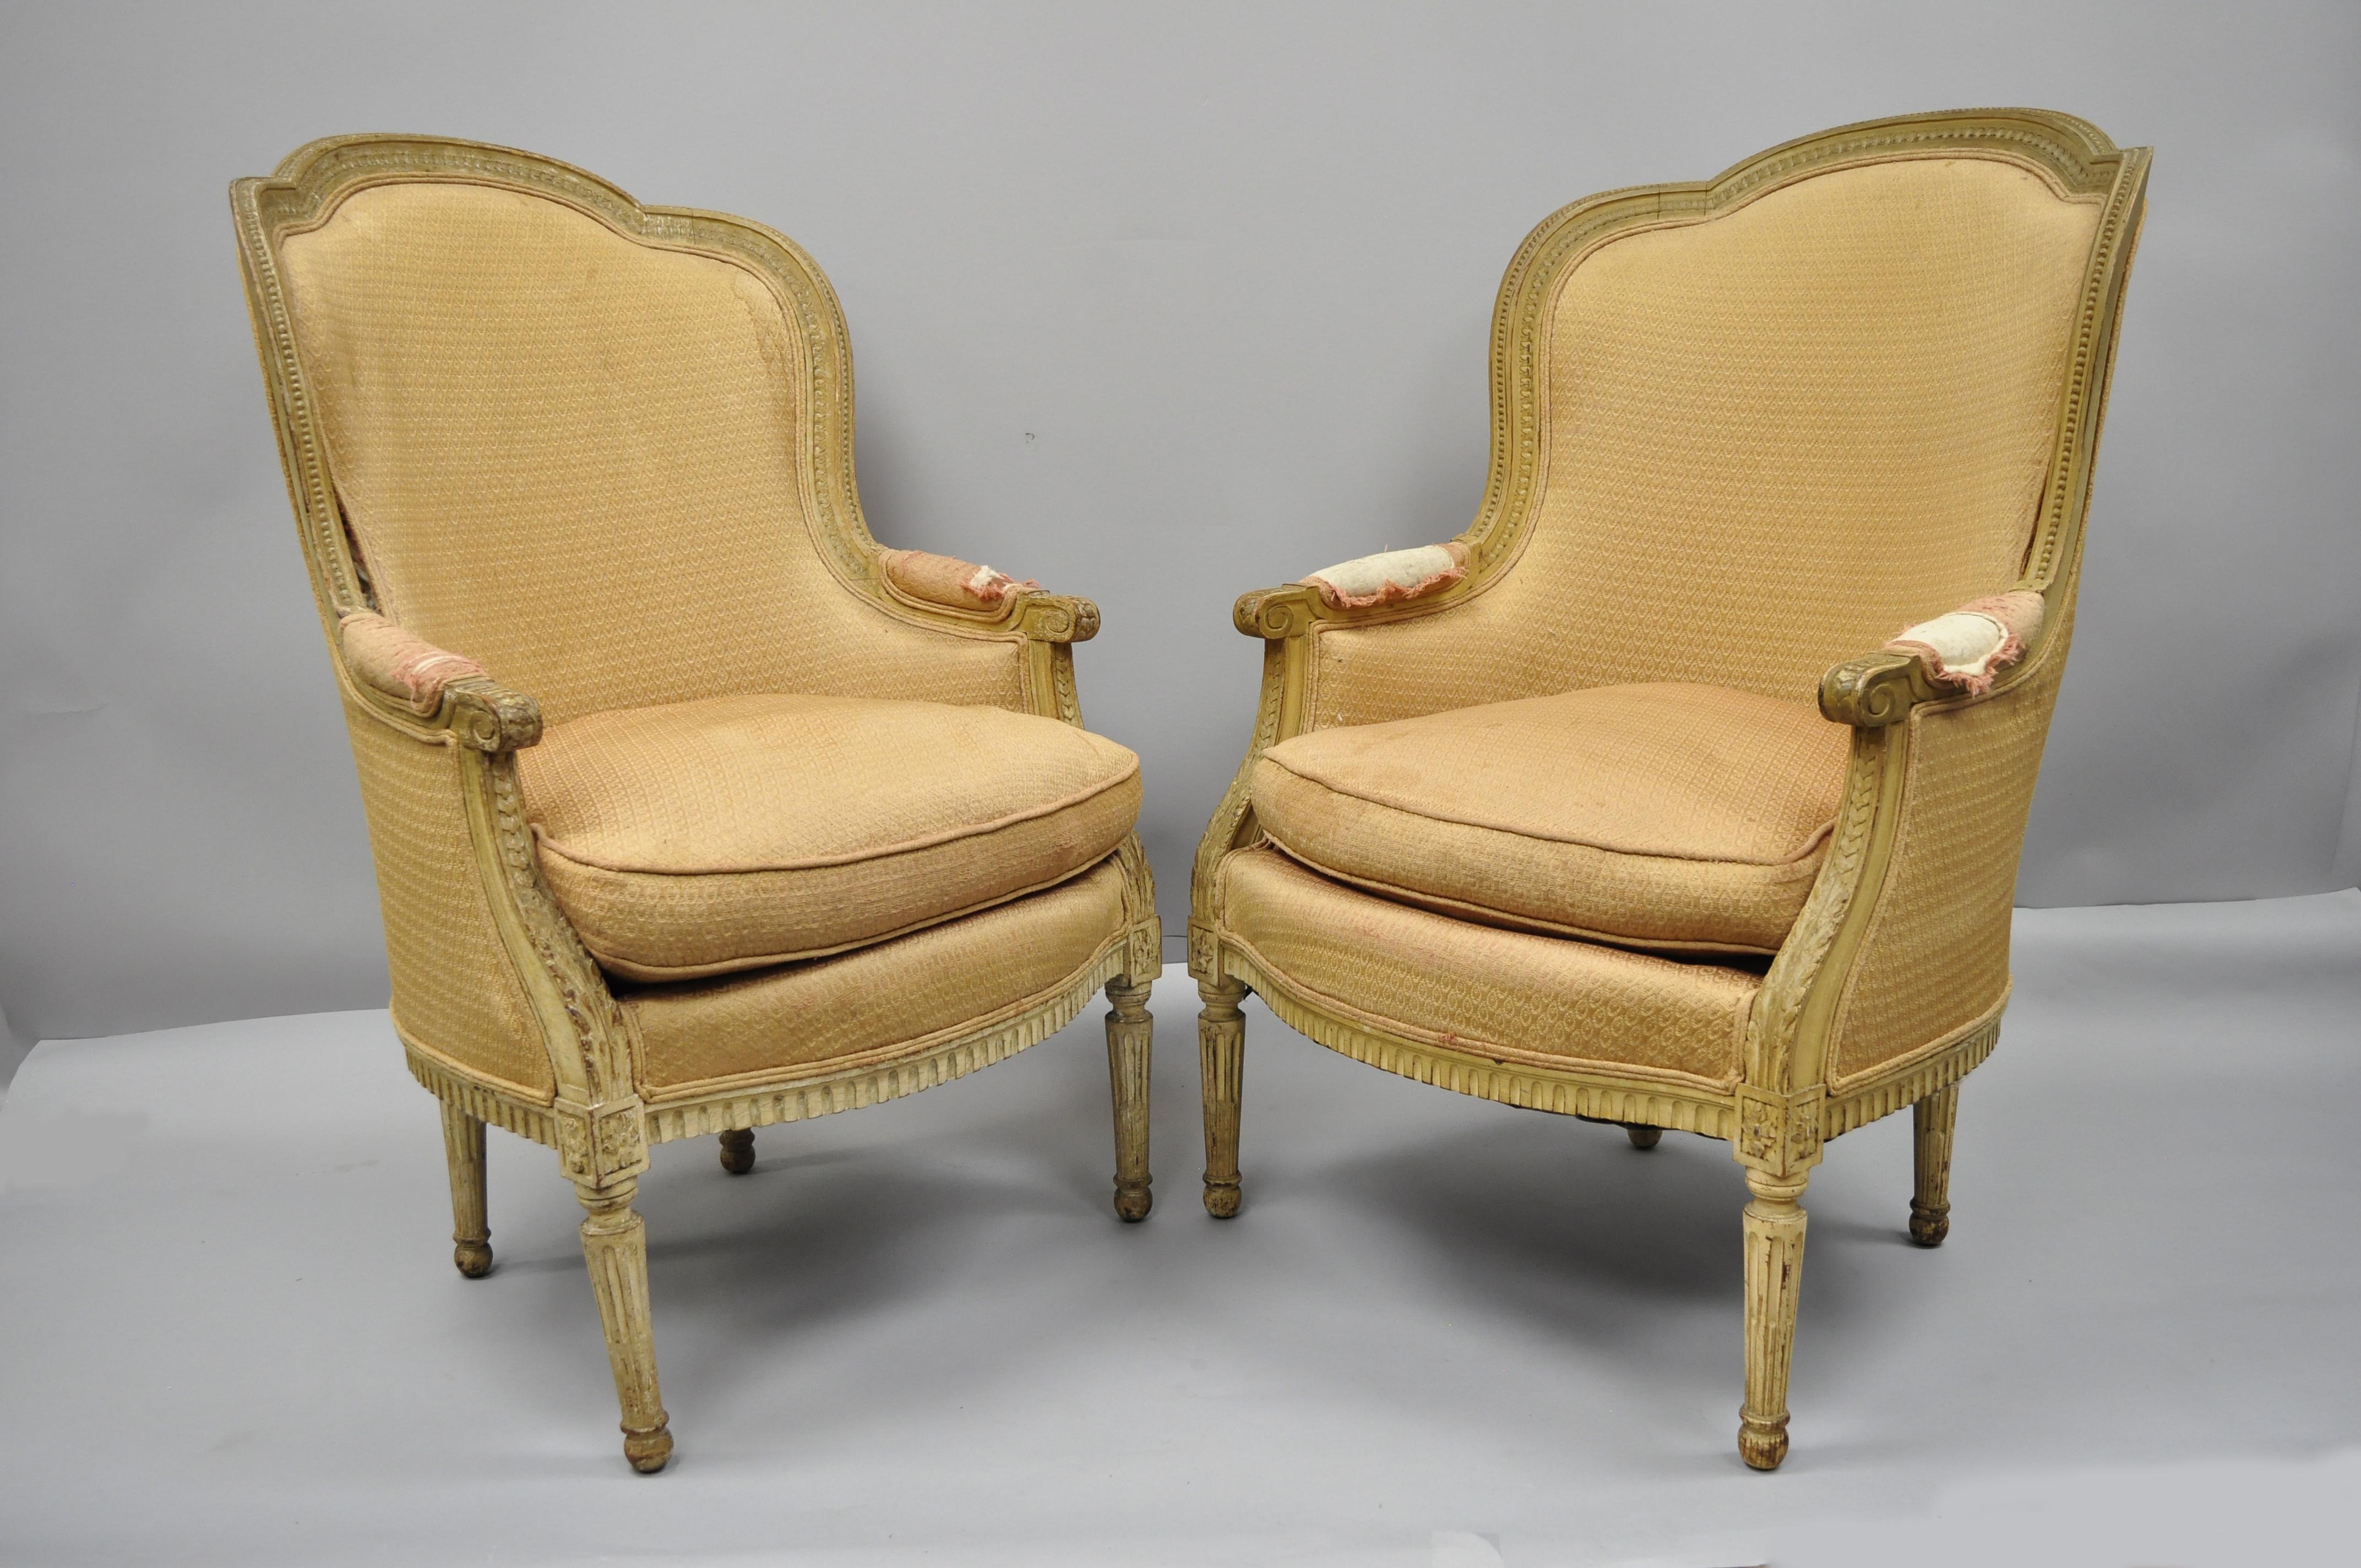 Pair of French Louis XVI style distress painted bergère armchairs attributed to Maison Jansen. Item features remarkable distress painted cream finish, finely carved frame, reeded and tapered legs, shaped top rail, barrel back, authentic aged patina,